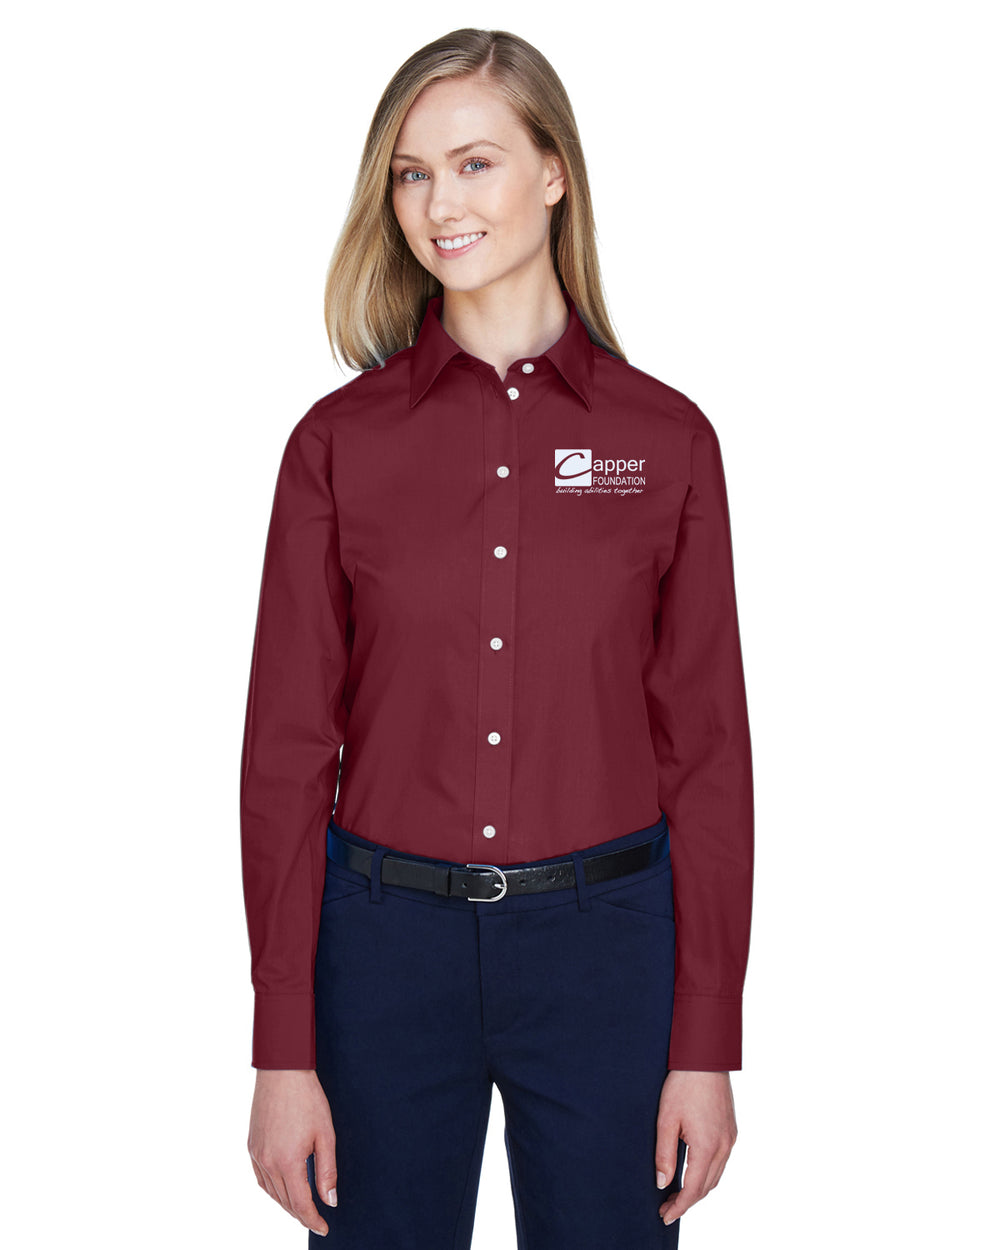 Capper Foundation - Ladies' Crown Collection Solid Broadcloth Woven Shirt - D620W